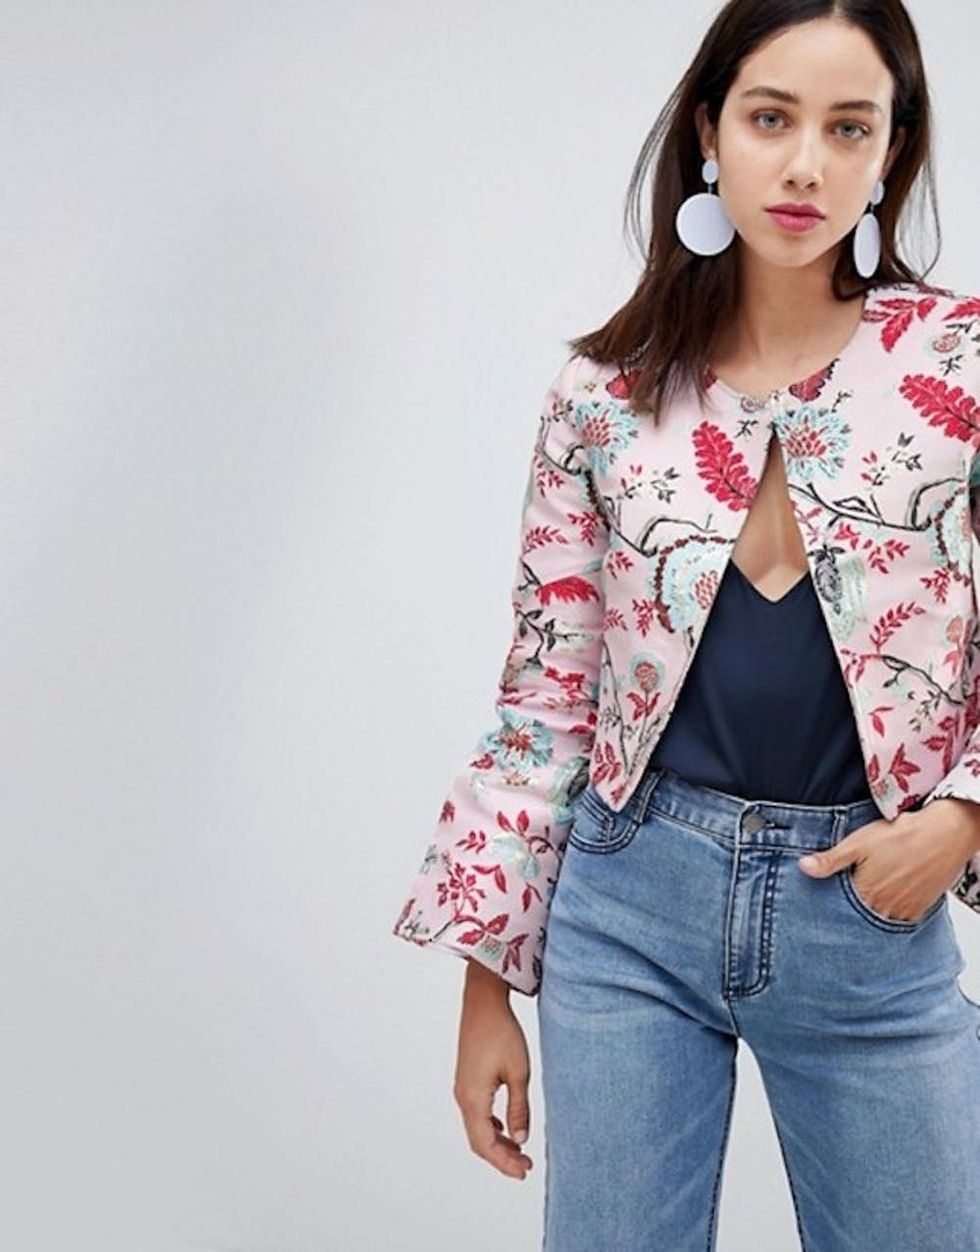 12 Cropped Jackets to Replace Spring’s Trench Coat - Brit + Co